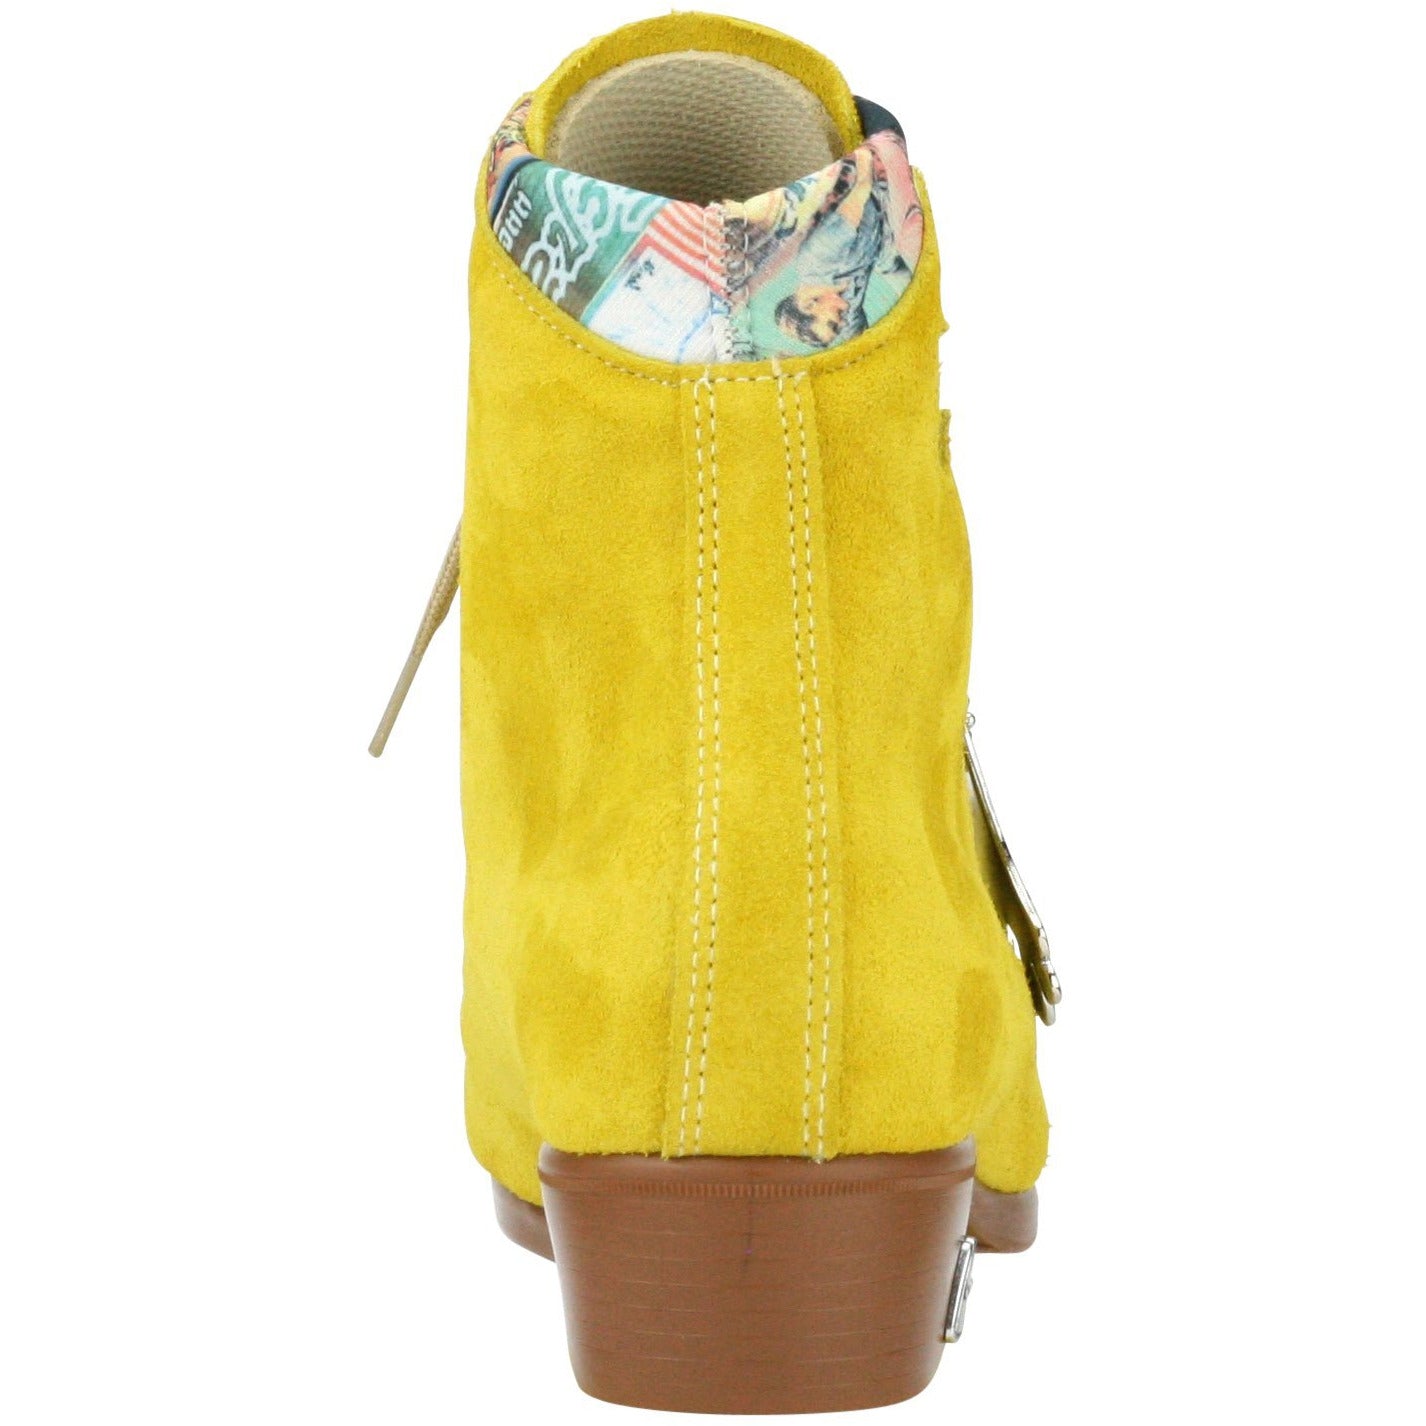 Moxi Lolly Pineapple Yellow Boots